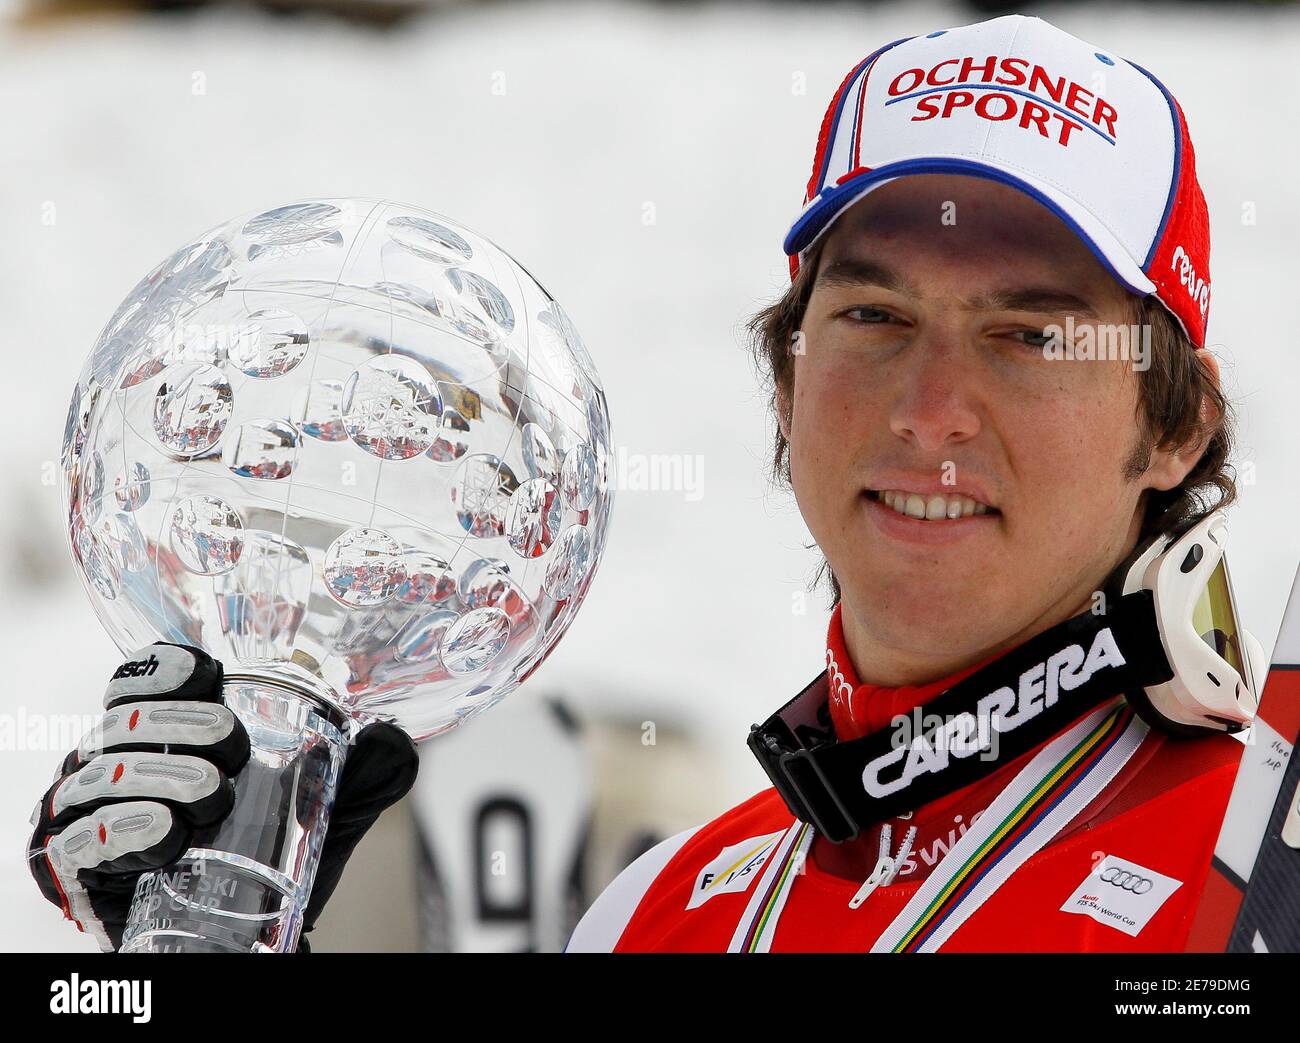 Carlo Janka of Switzerland poses with the men's overall Alpine Skiing World Cup trophy in Garmisch-Partenkirchen March 13, 2010.  REUTERS/Miro Kuzmanovic (GERMANY - Tags: SPORT SKIING) Foto Stock